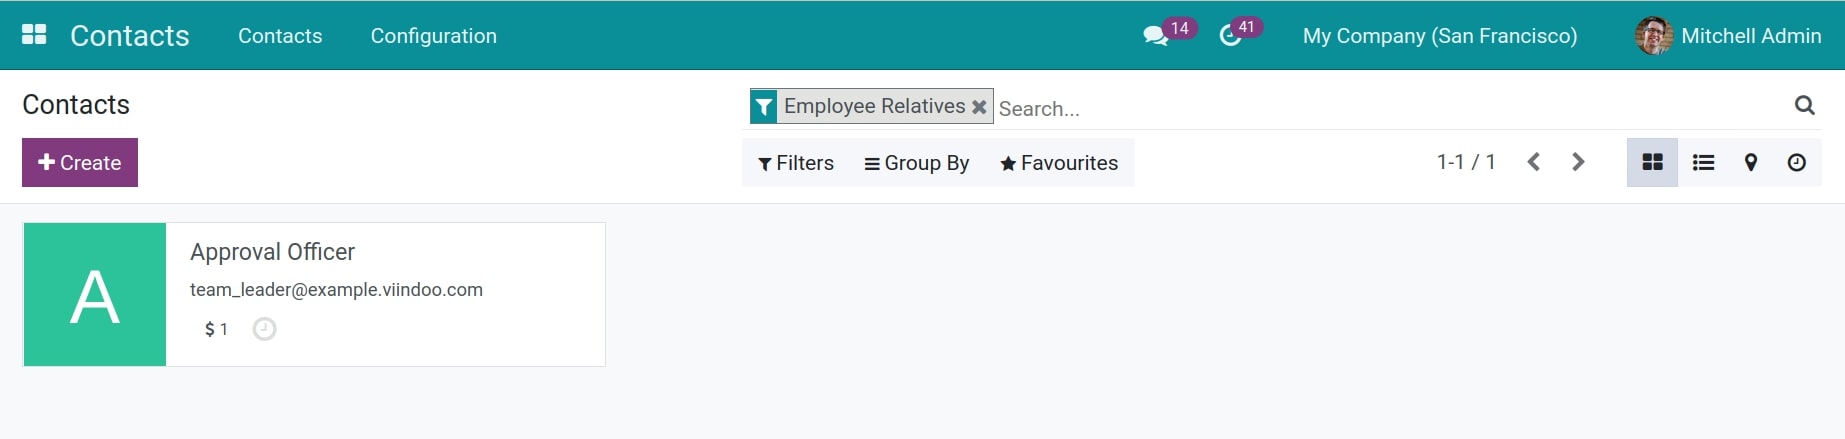 Filter the employee's relative